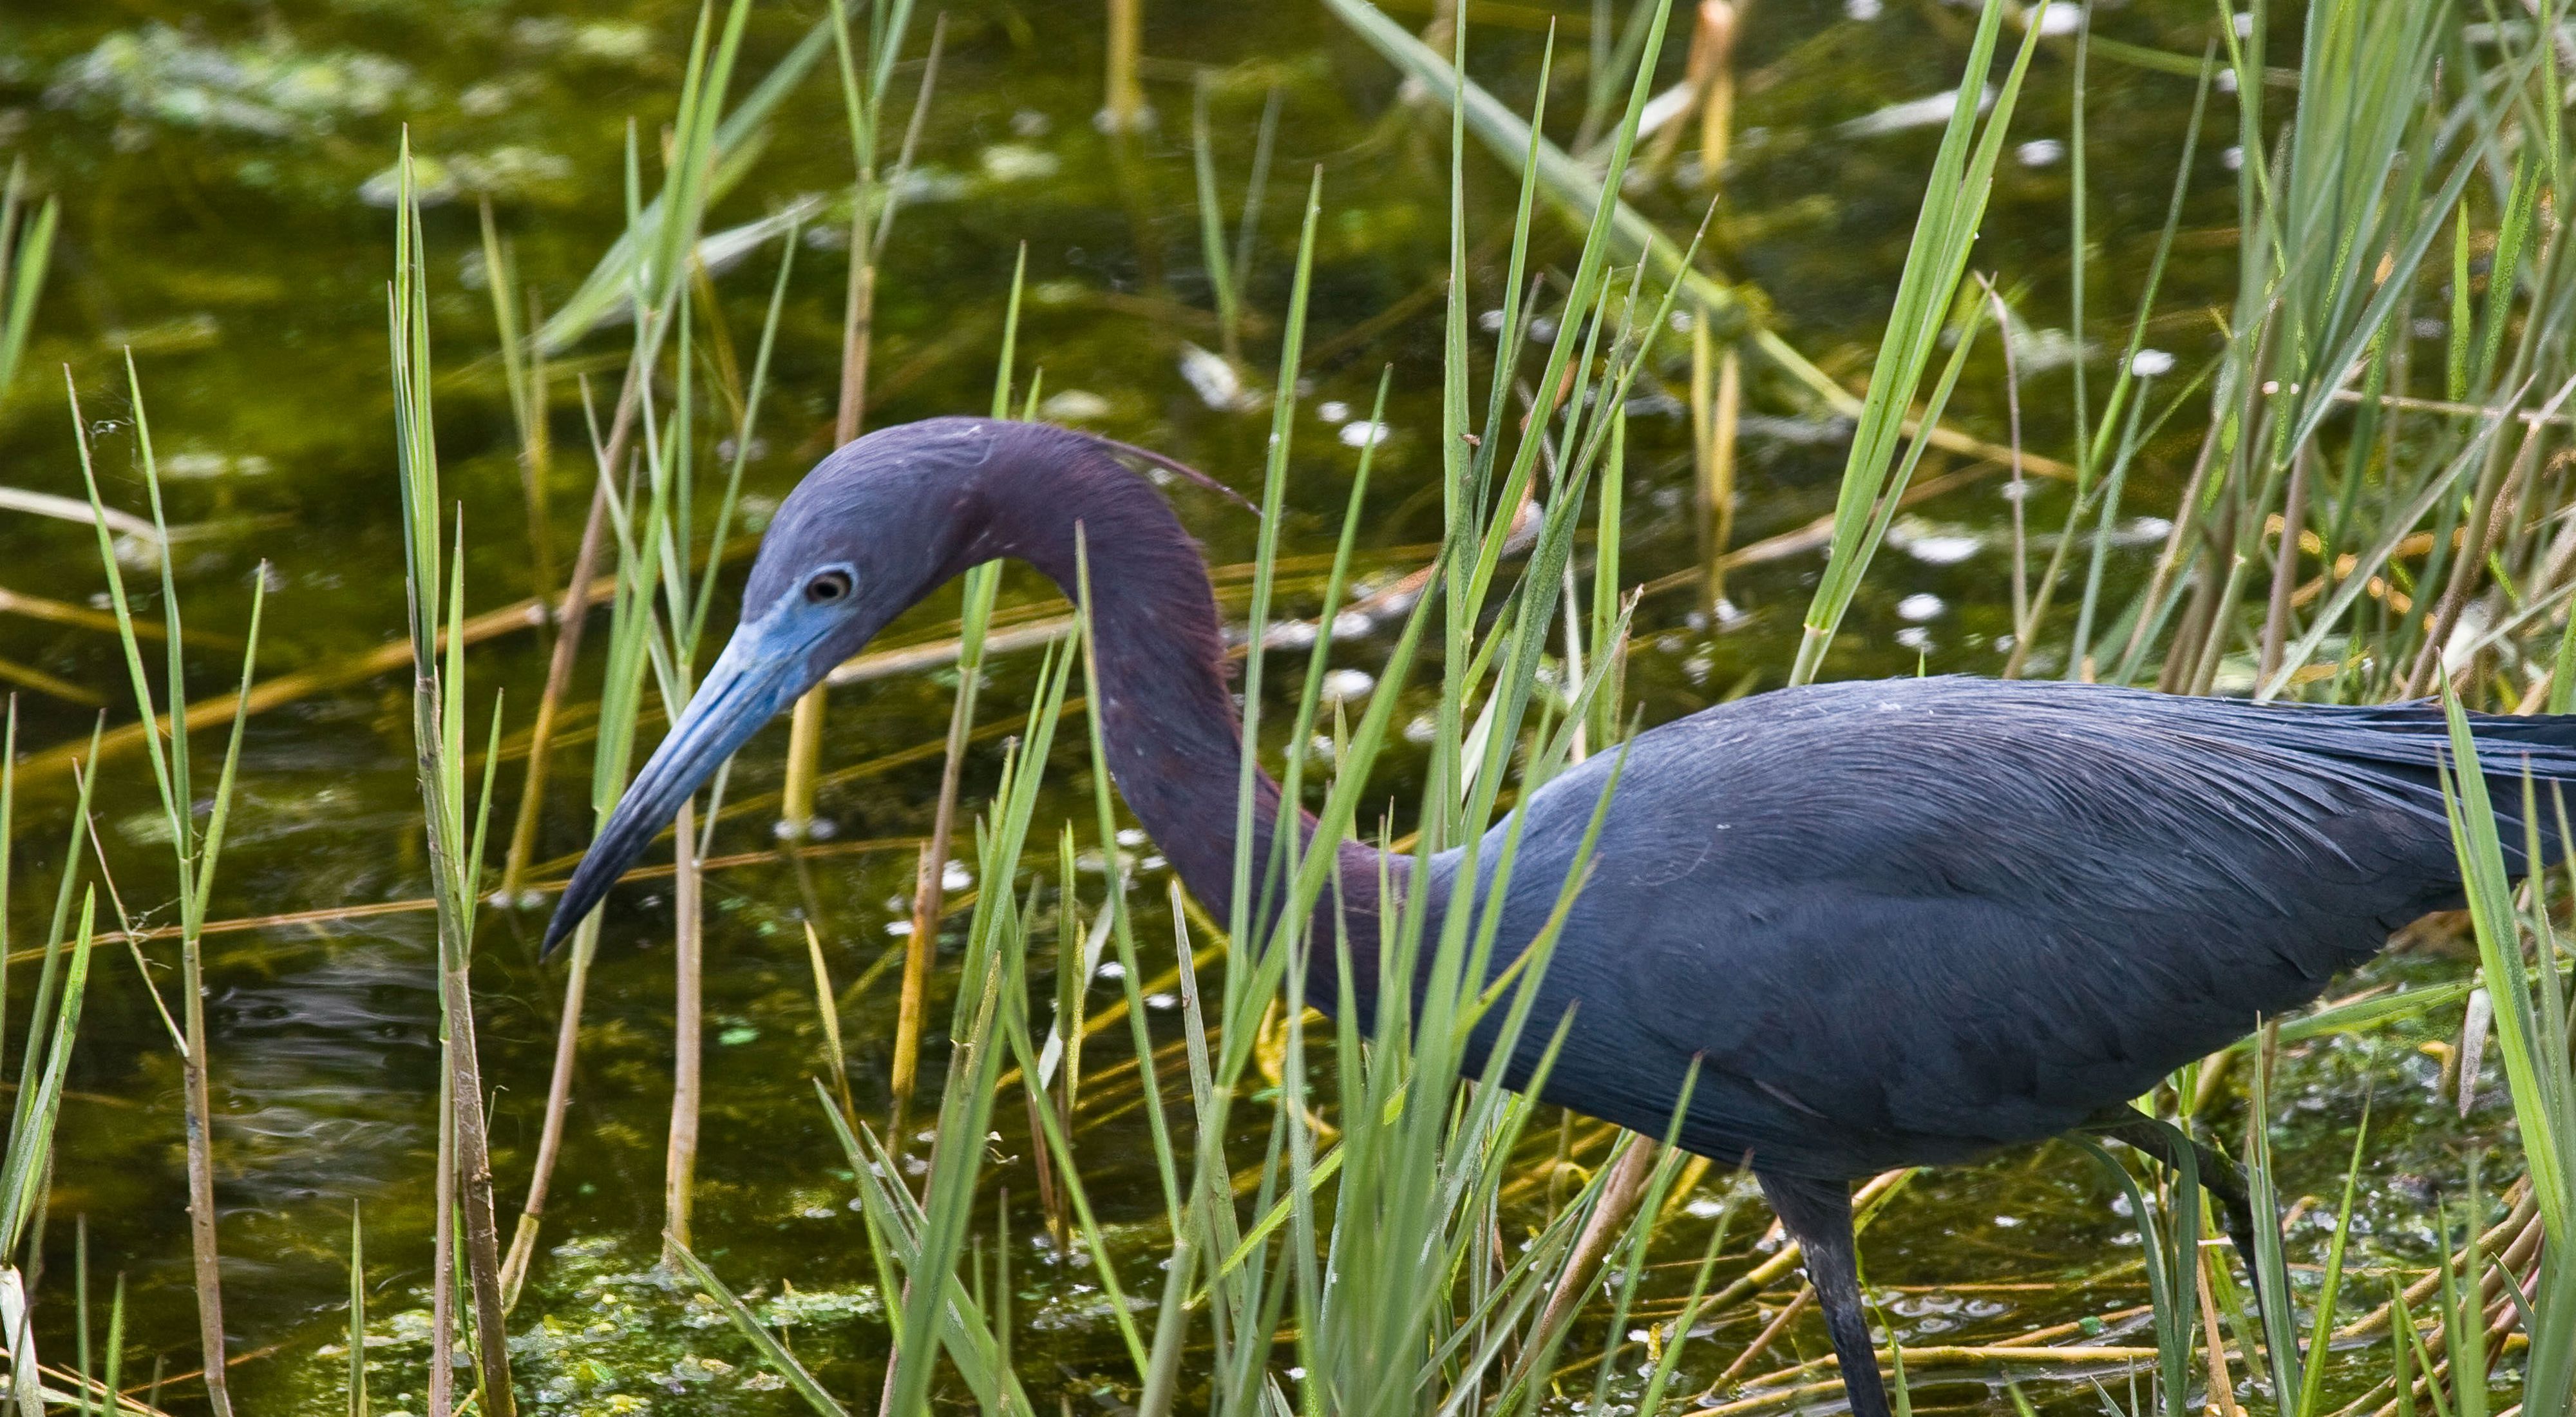 (ALL INTERNAL, LIMTED EXTERNAL USES) The Little Blue Heron, Egretta caerulea, is a small heron. It breeds from the Gulf states of the USA through Central America and the Caribbean south to Peru and Uruguay. It is a resident breeder in most of its range, but some northern breeders migrate to the southeastern USA or beyond in winter. The Little Blue Heron's breeding habitat is sub-tropical swamps. It nests in colonies, often with other herons, usually on platforms of sticks in trees or shrubs. 3-7 light blue eggs are laid. Photographed in a Florida wetland. PHOTO CREDIT: © Kent Mason  